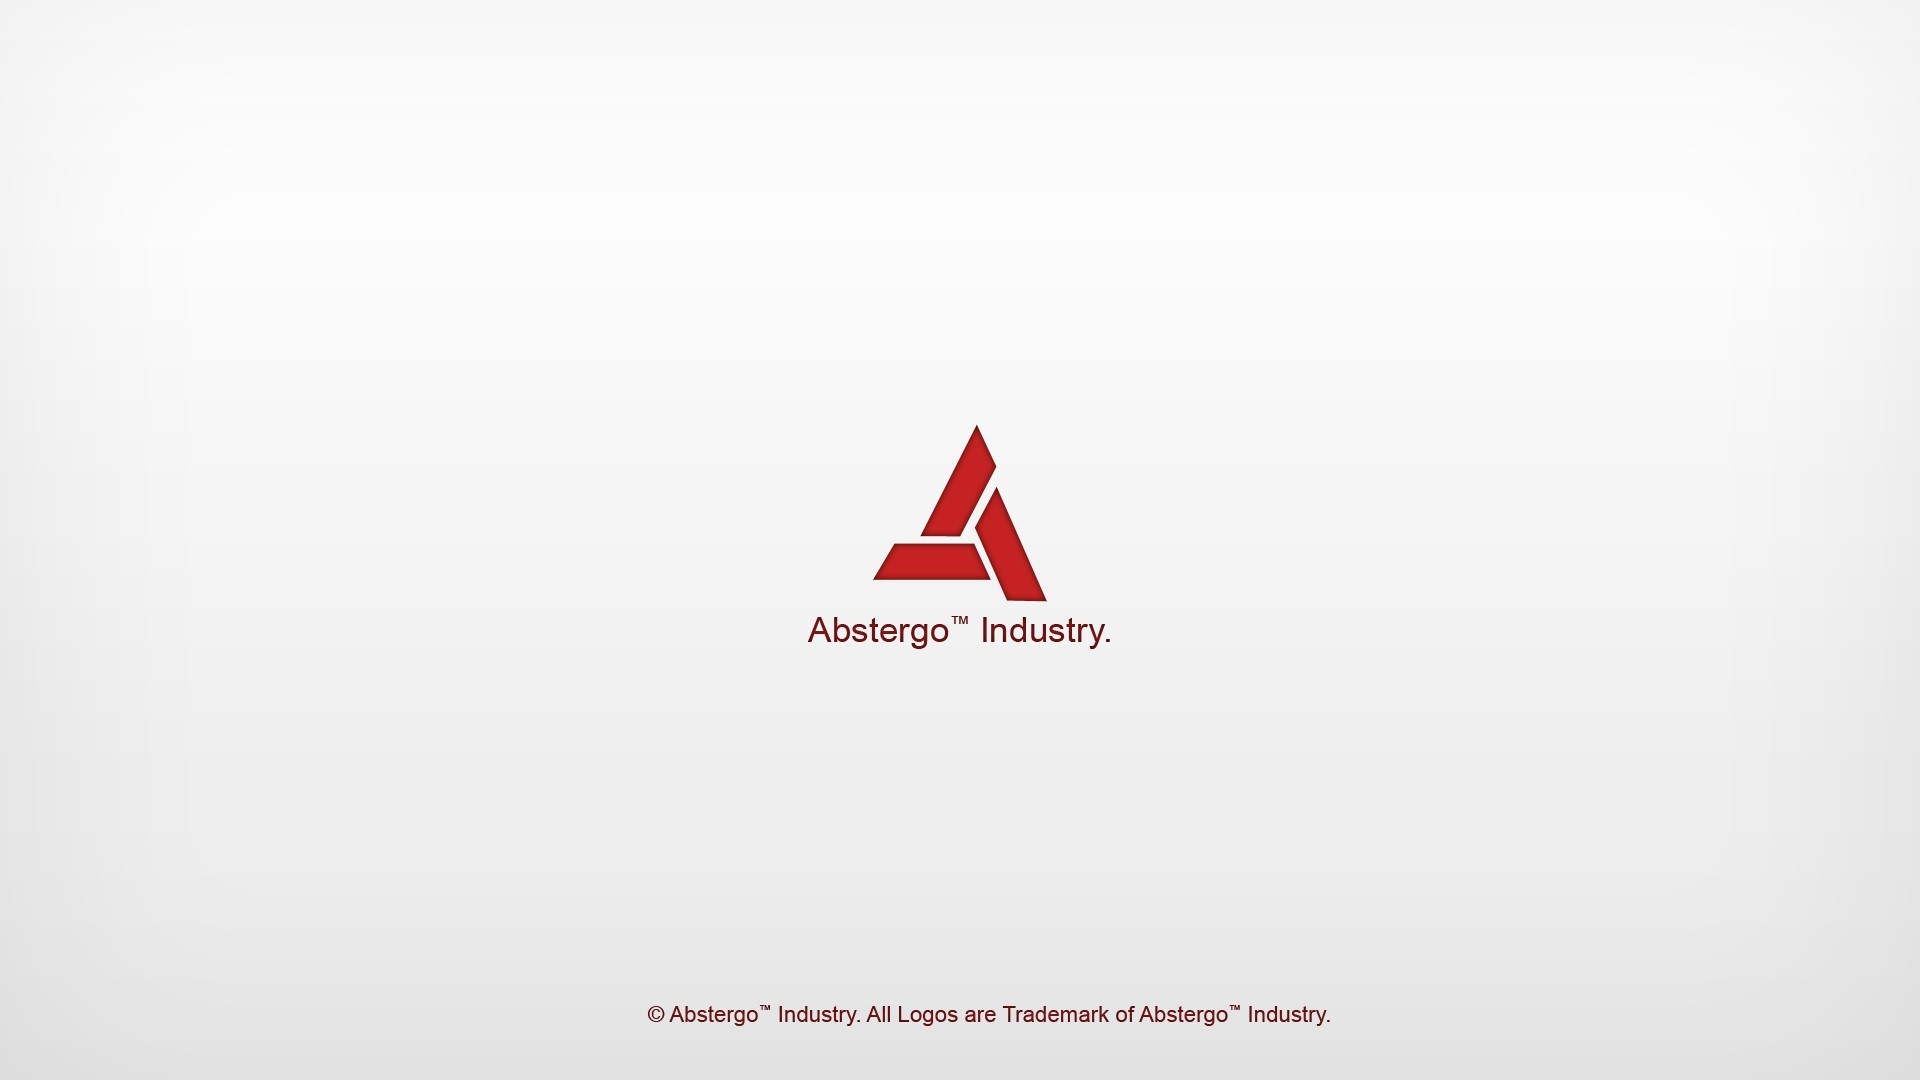 Assassins Creed Video Games Abstergo Abstergo Industries Simple Background Logo Minimalism White Bac 1920x1080